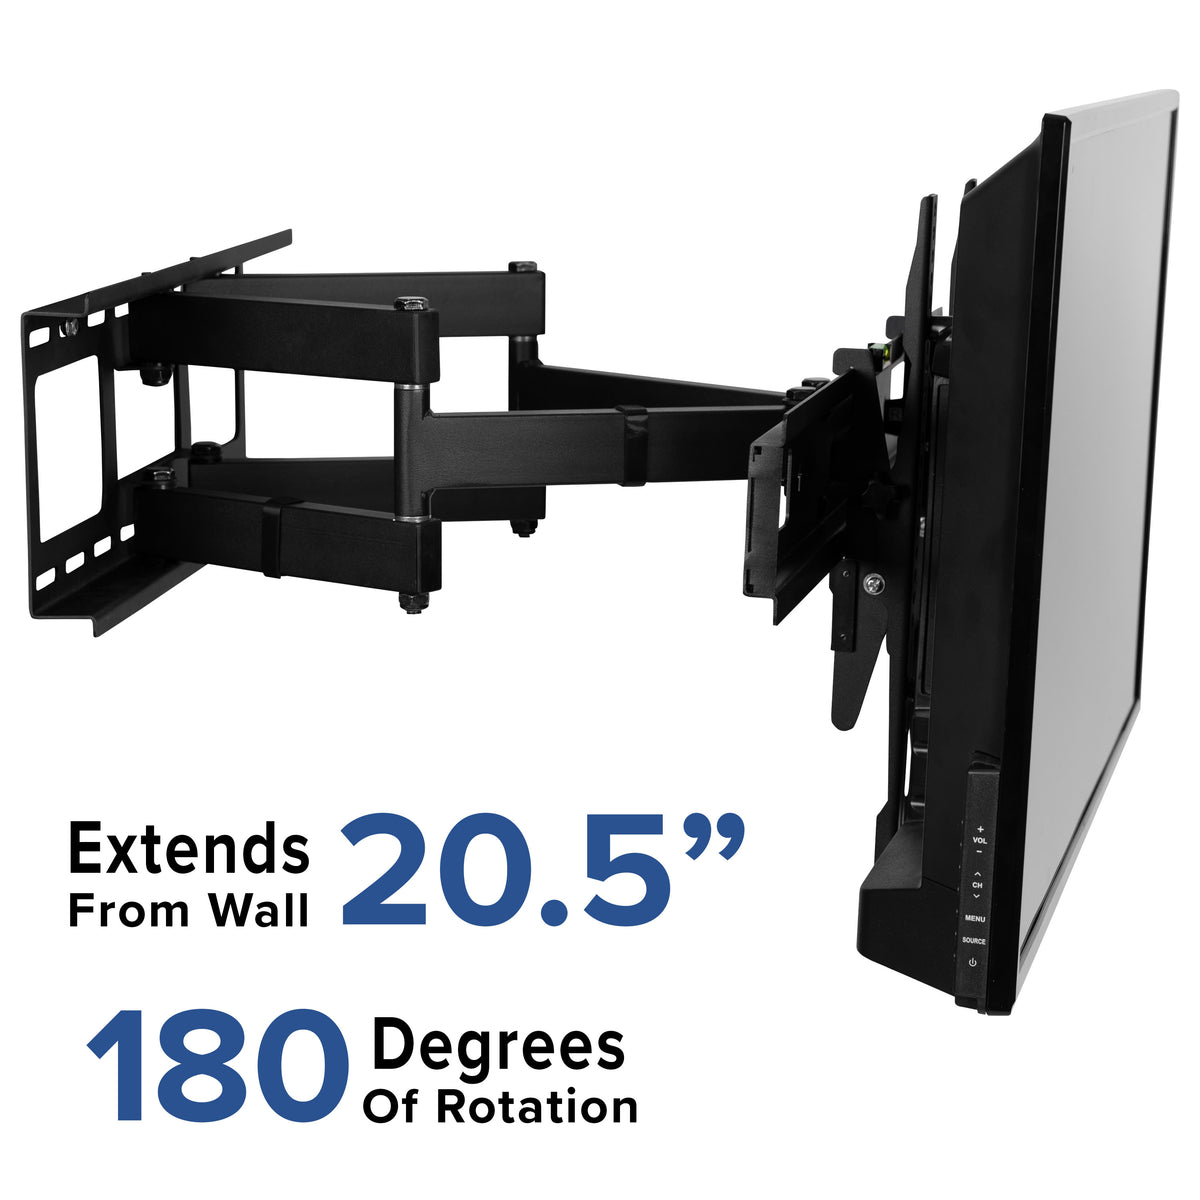 40"-84" TV |#| 40"-84" Full Motion Adjustable TV Wall Mount-Weight Capacity Up to 100lbs.